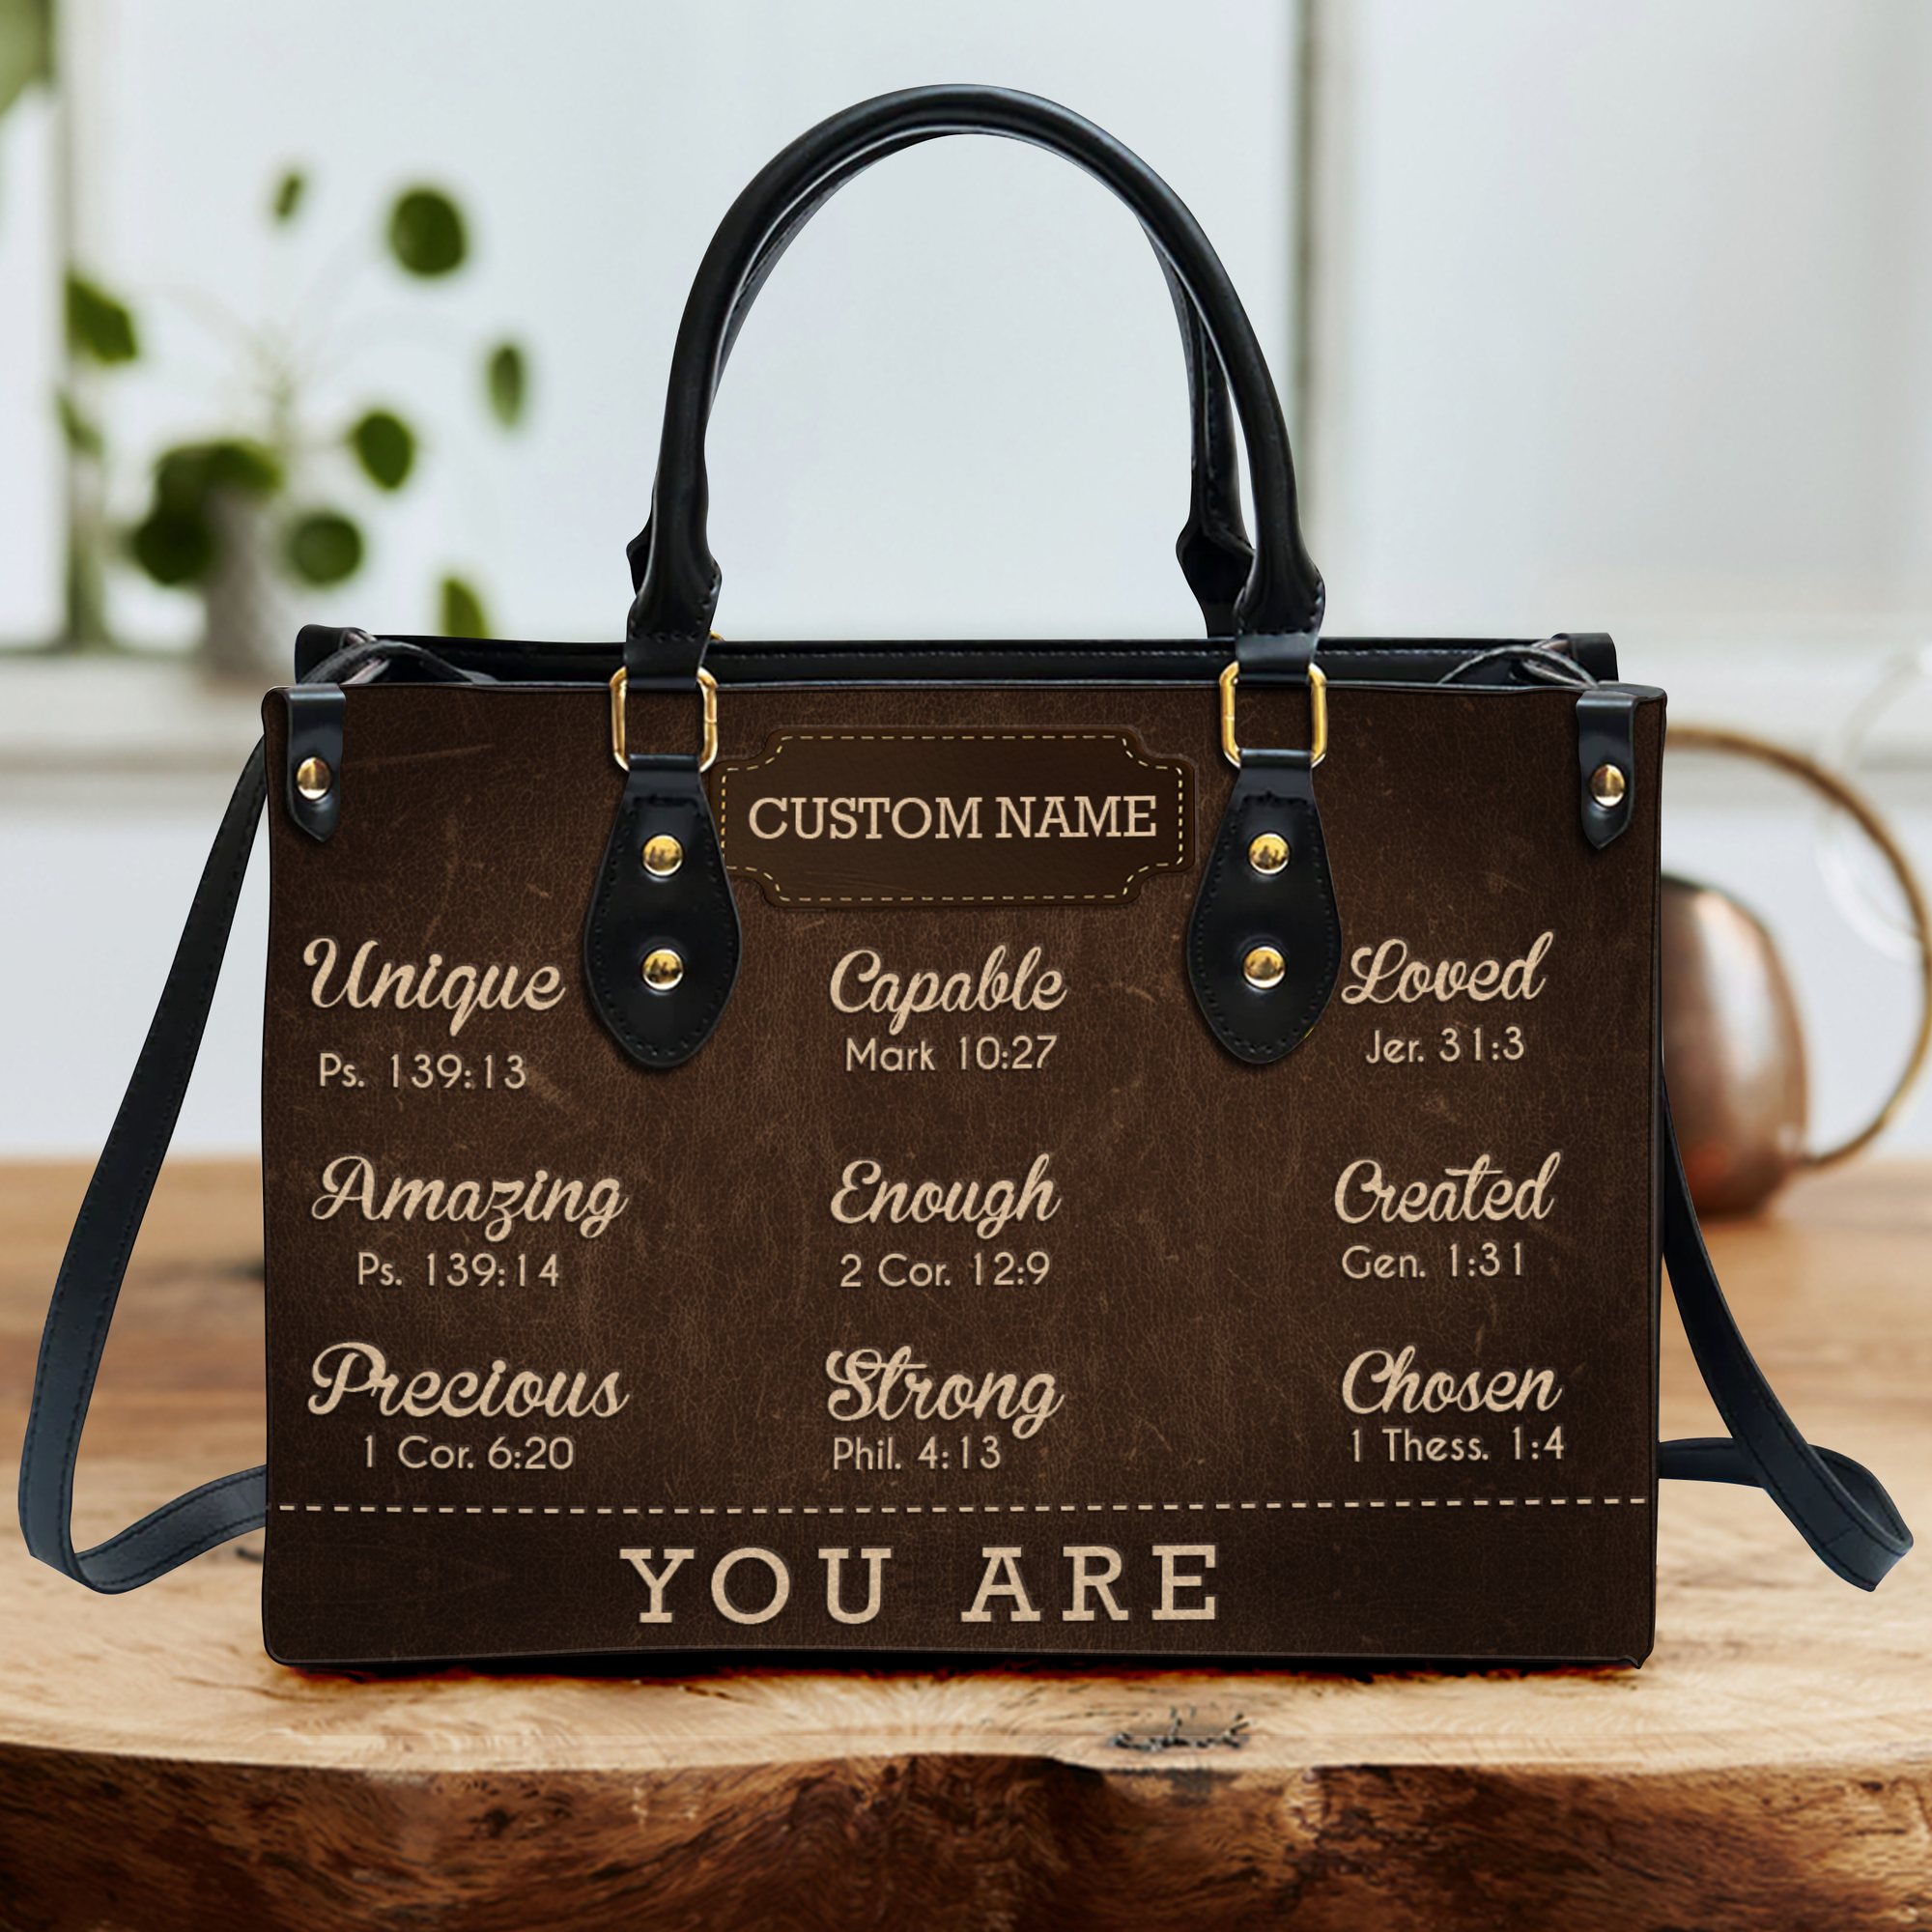 Dark Leather Texture Inspirational You Are Custom Leather Handbag - Personalized Custom Leather Bag